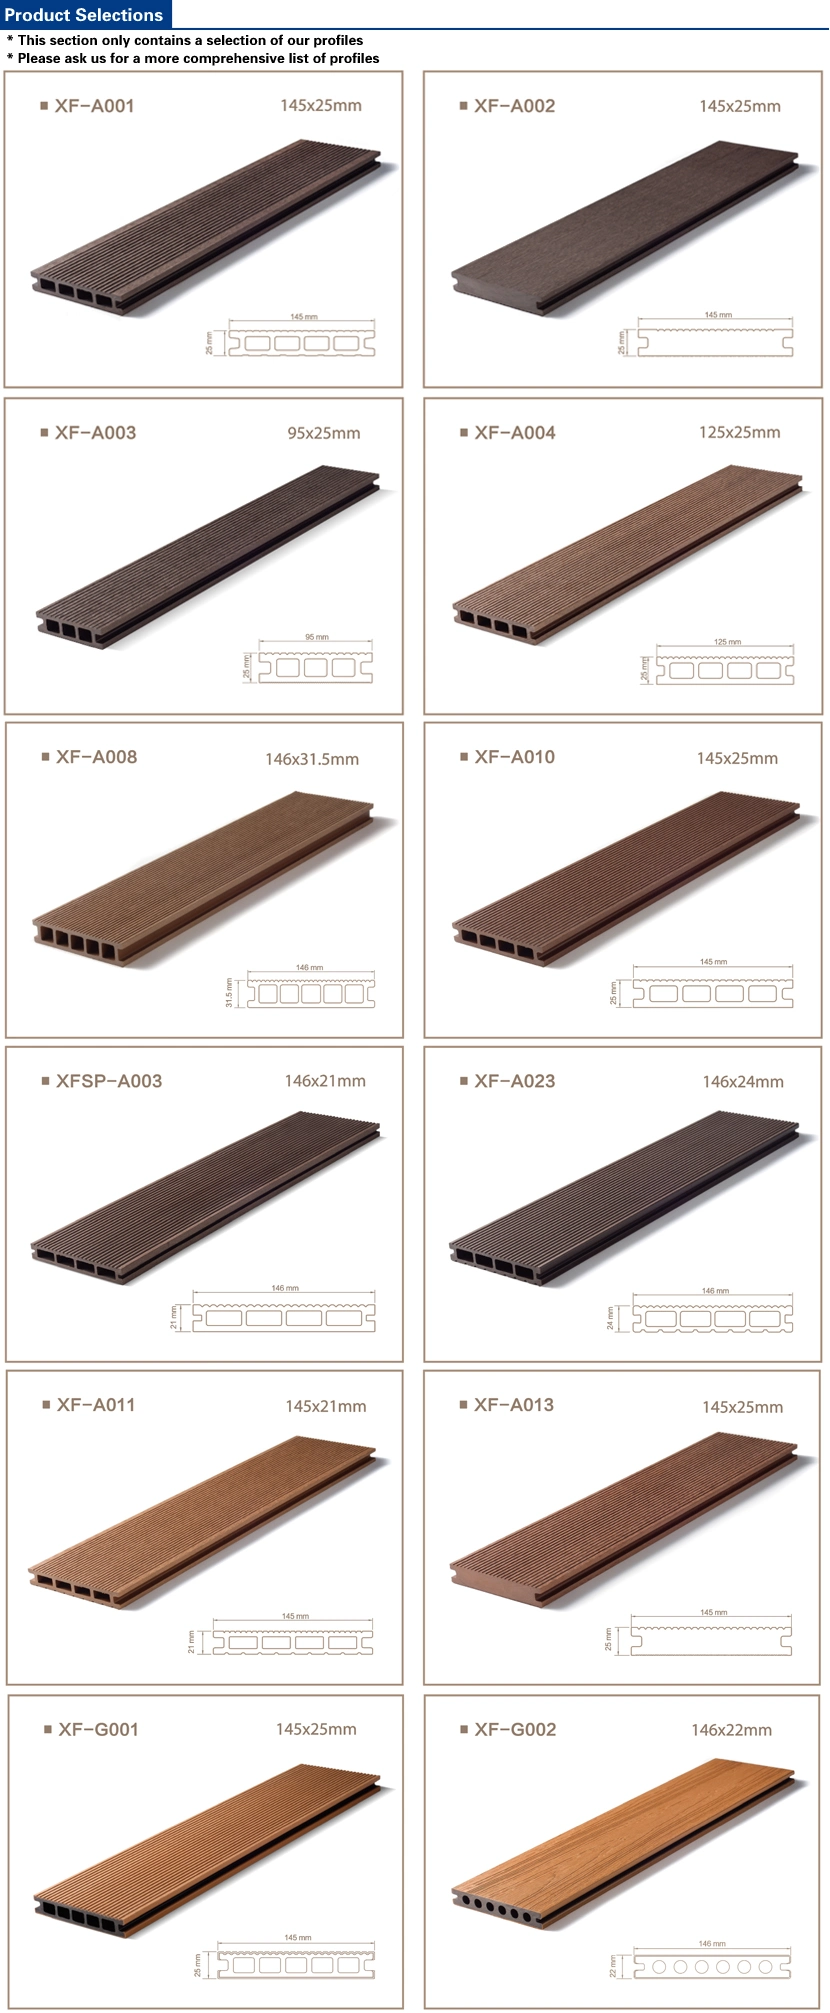 No Crack WPC Decking Boards Deep Embossing Panels